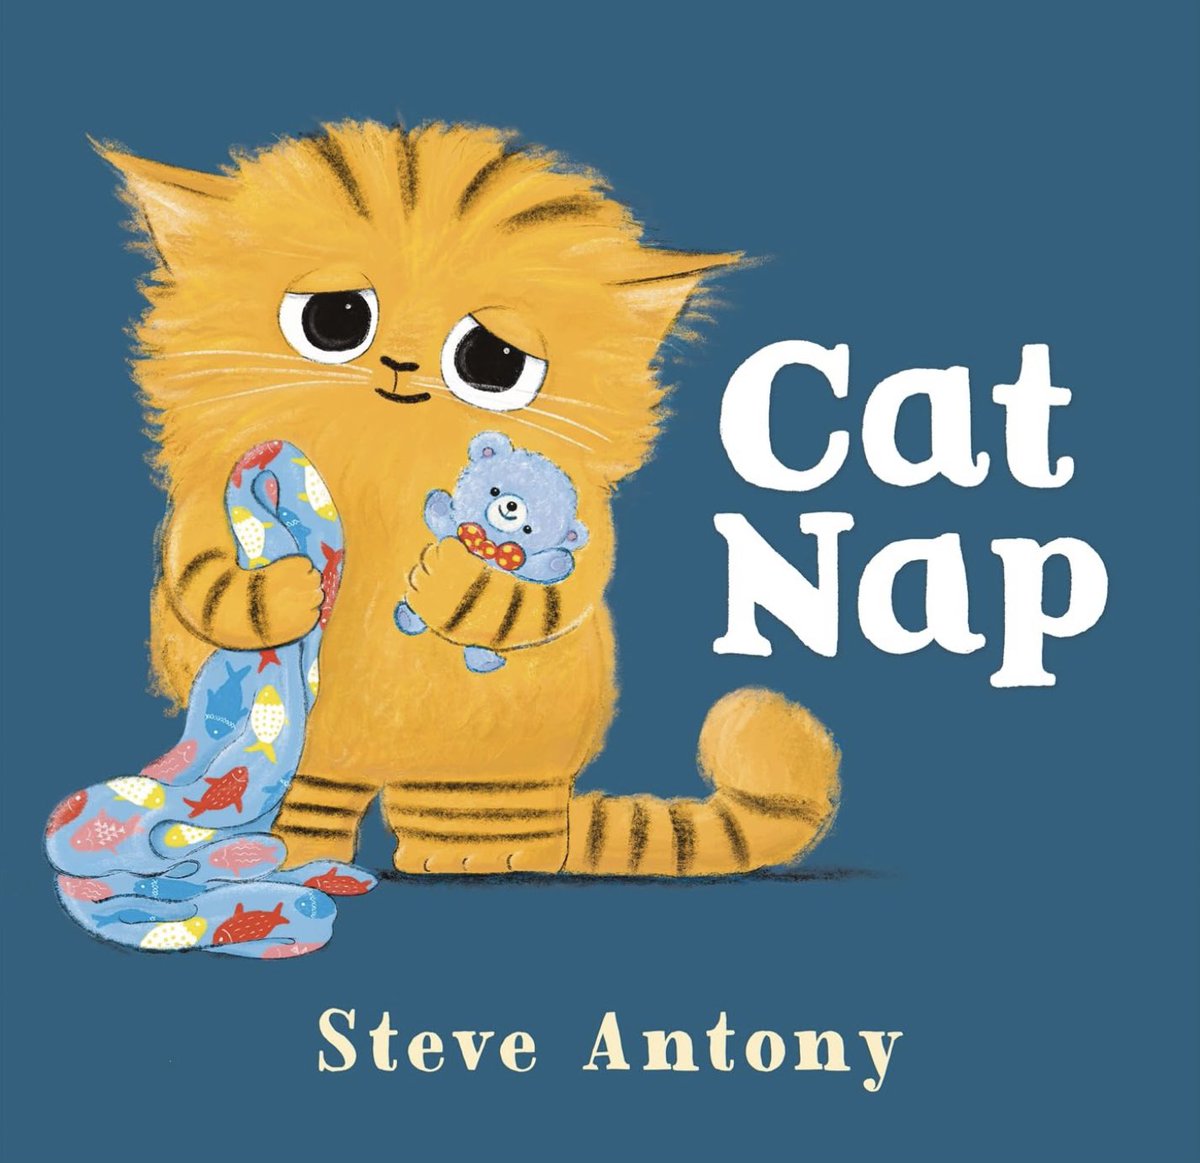 Here’s the cover of CAT NAP! It is the first in a 4 book series with @macmillankidsuk: CAT NAP, BIRD BATH, CHICK PEA, HIPPO POTTY. These animal toddlers are so fun to draw, and I approached the narrative in a new and different way for this series. CAT NAP will publish in April.